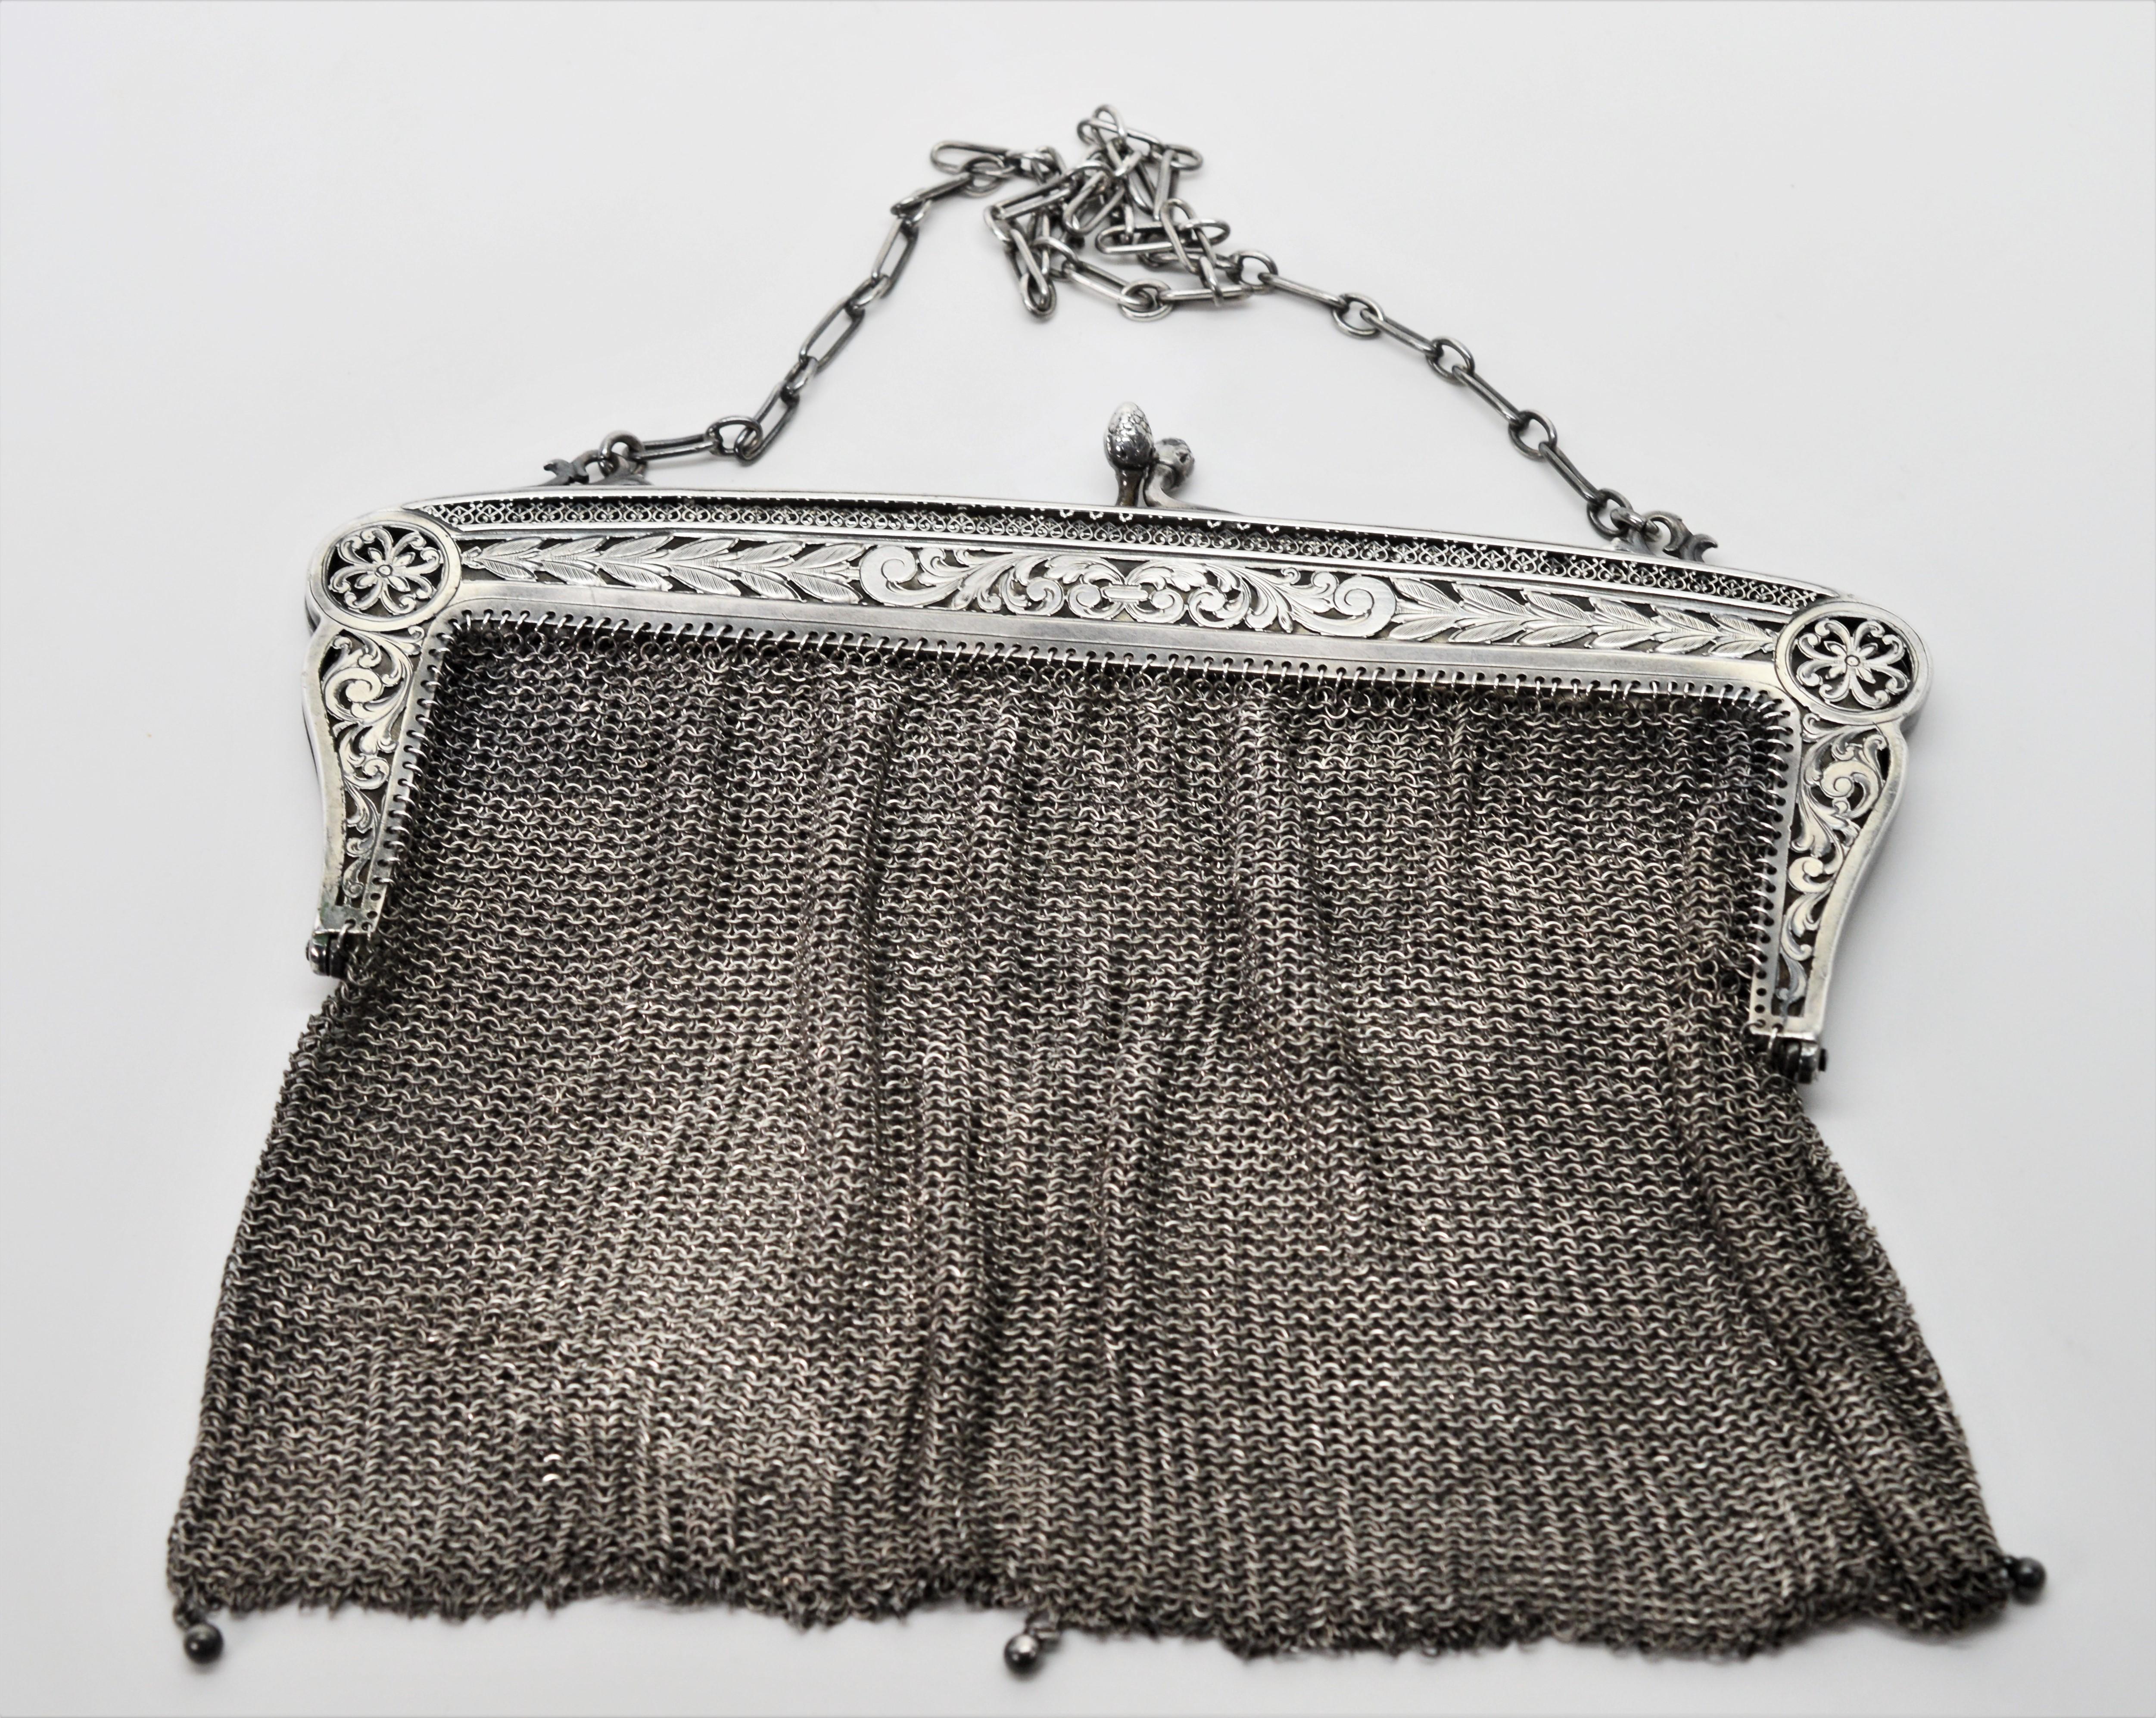 Exquisite filigree and engraving is on the sterling silver frame of this pre - 1888 German chain mail mesh antique purse evening bag.
The purse frame has a working kisslock snap with an acorn design ball closure. The frame's reverse side has an